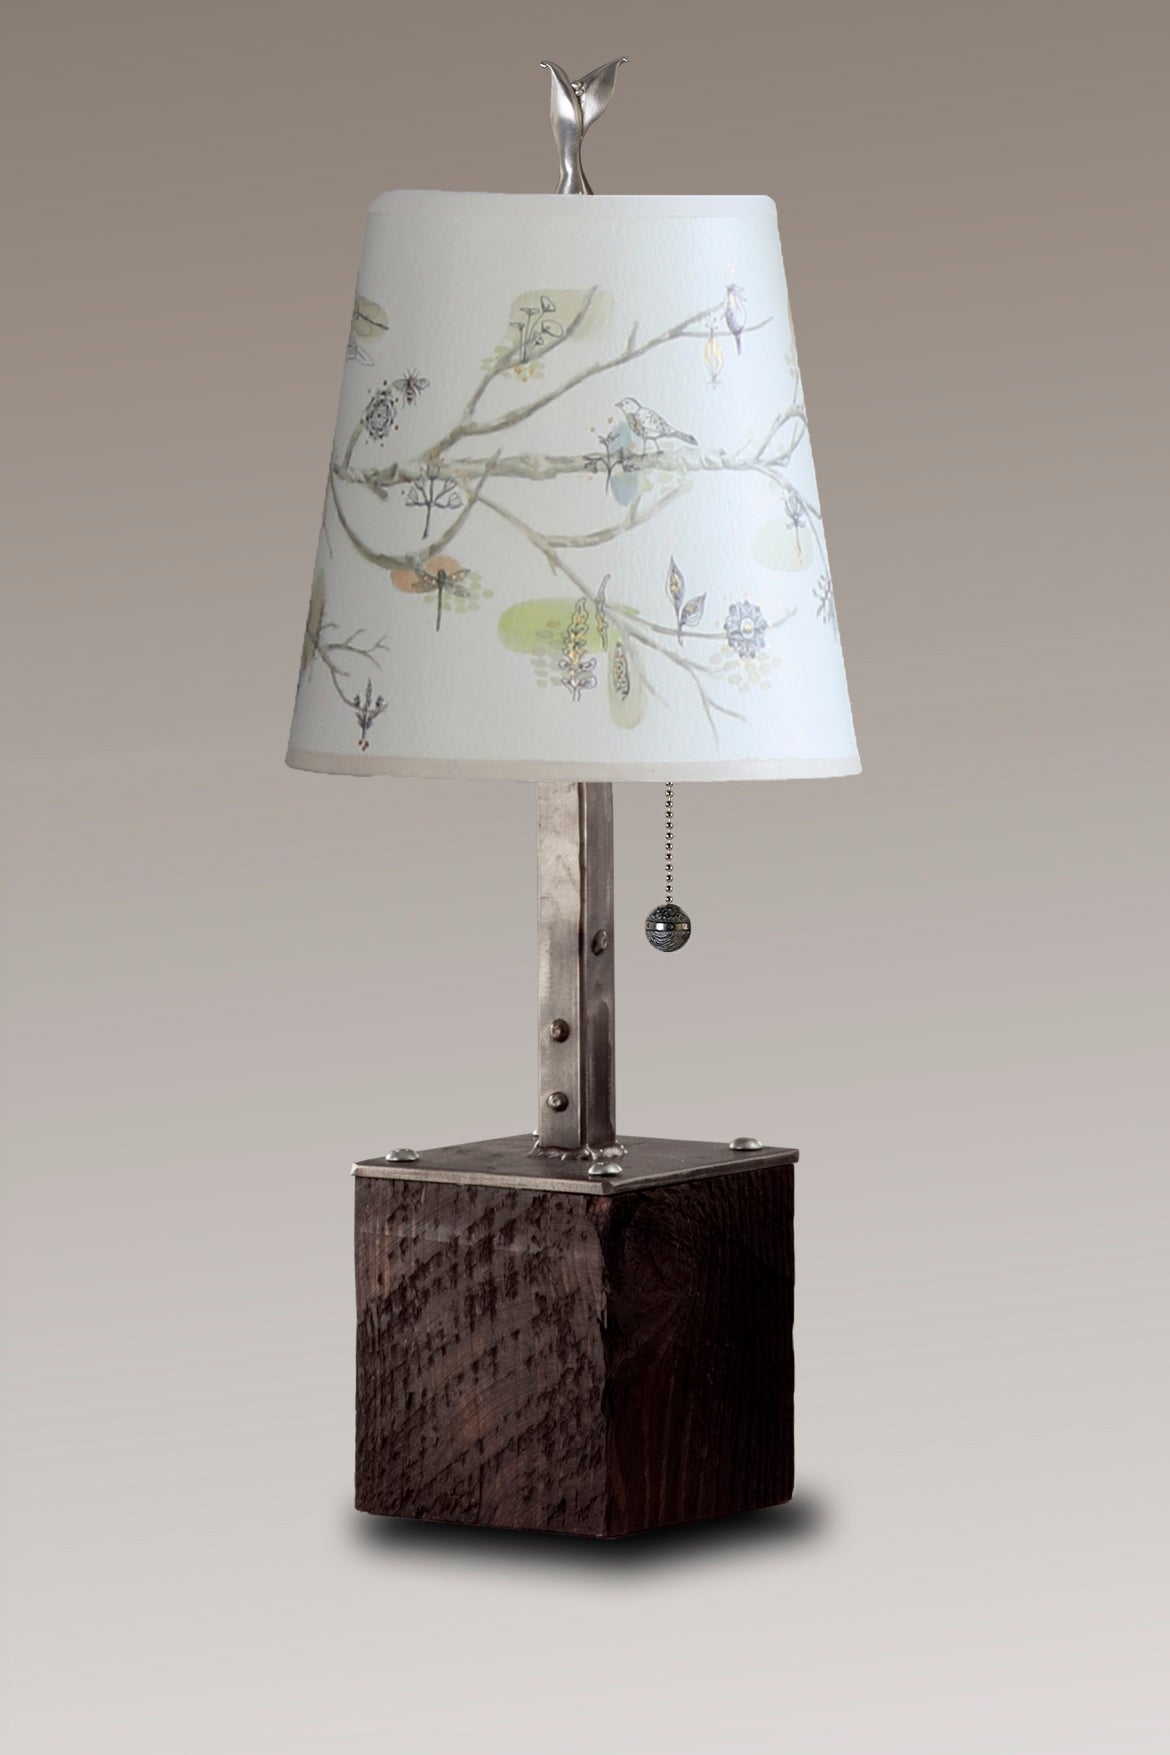 Janna Ugone &amp; Co Table Lamps Steel Table Lamp on Reclaimed Wood with Small Drum Shade in Artful Branch